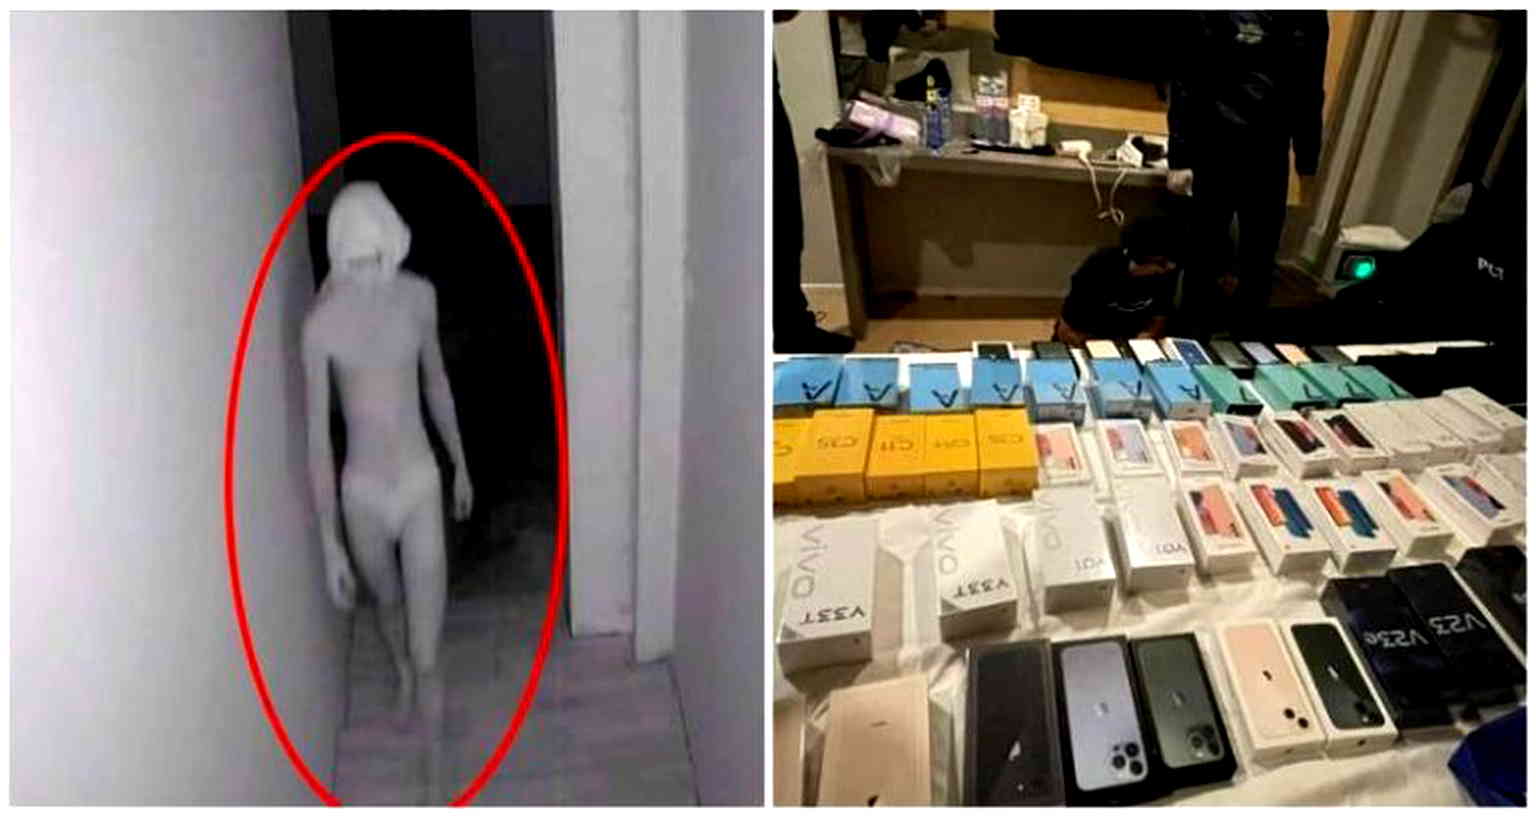 Thai serial thief who stole hundreds of phones while only wearing white briefs arrested